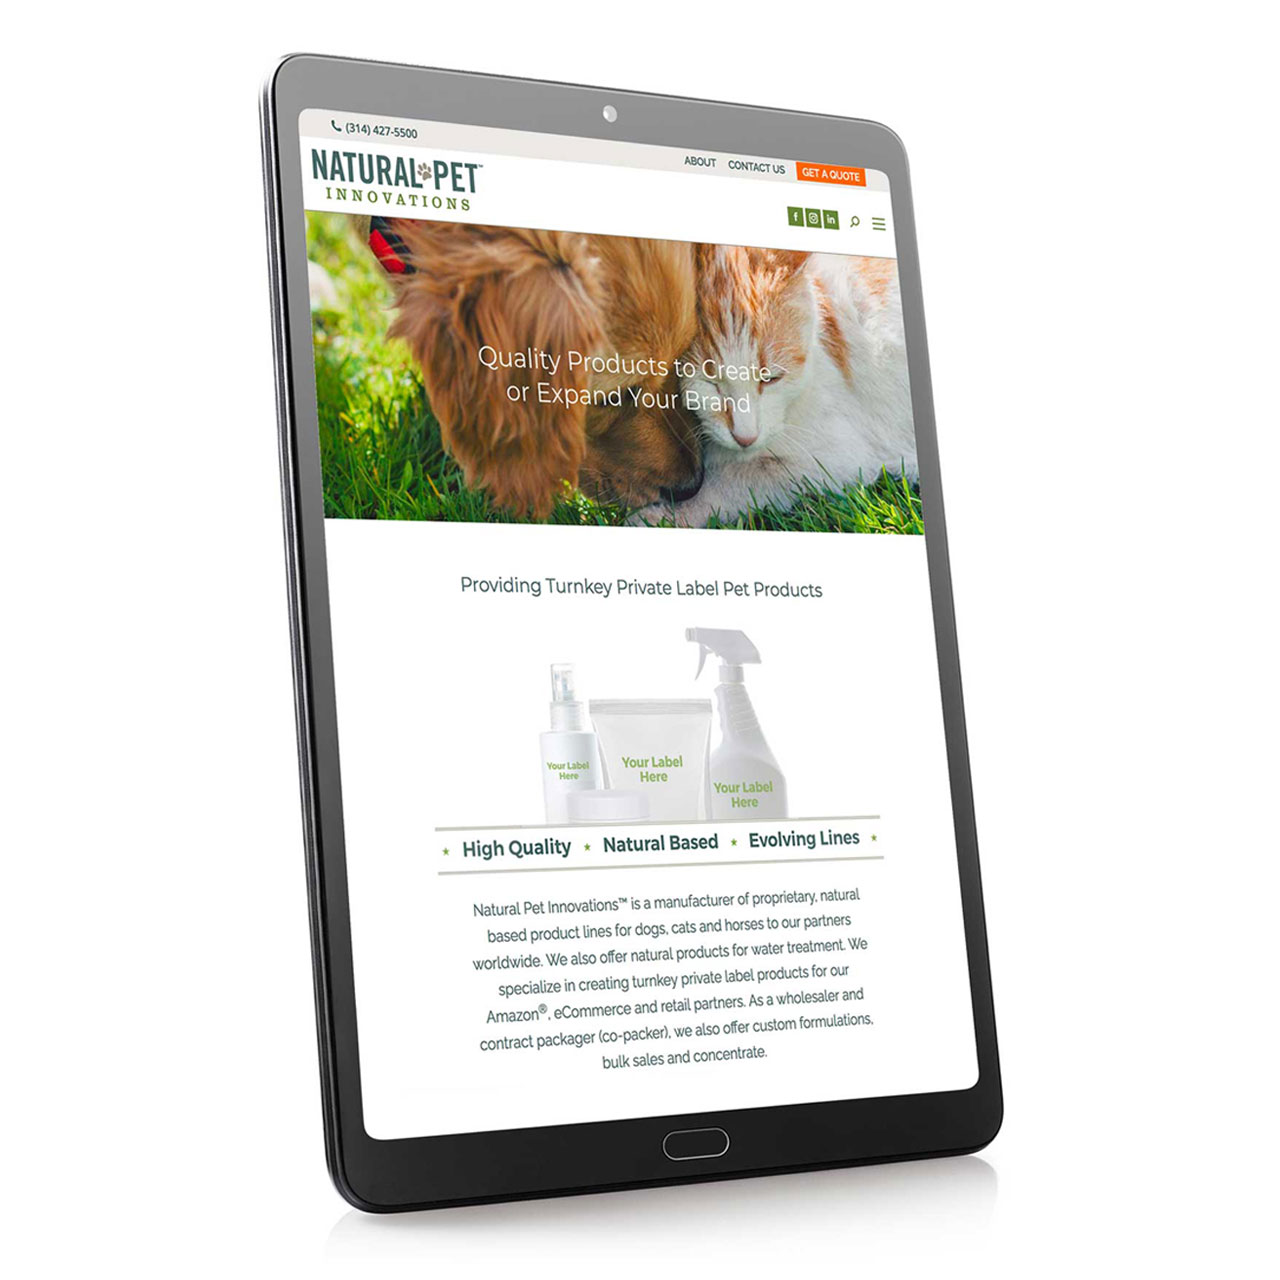 Natural Pet Innovations website shown on tablet device